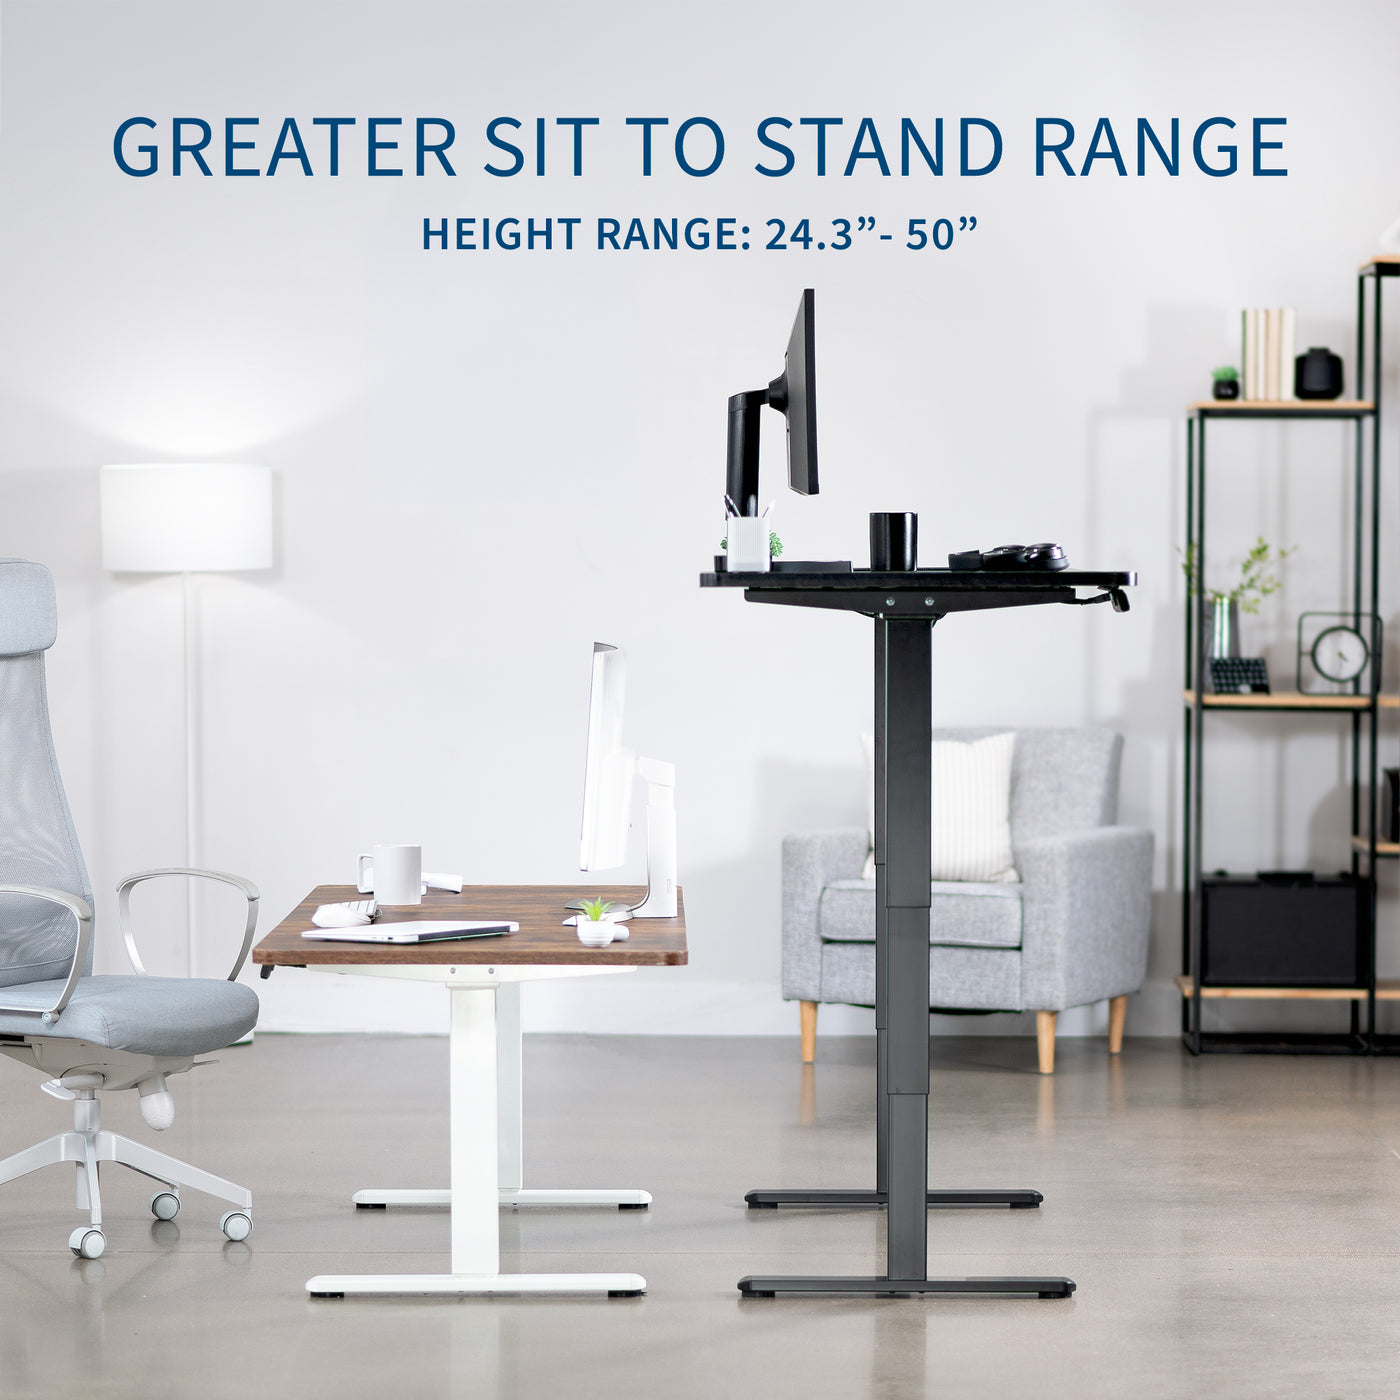 Sit to stand easily with a wide range of height options.